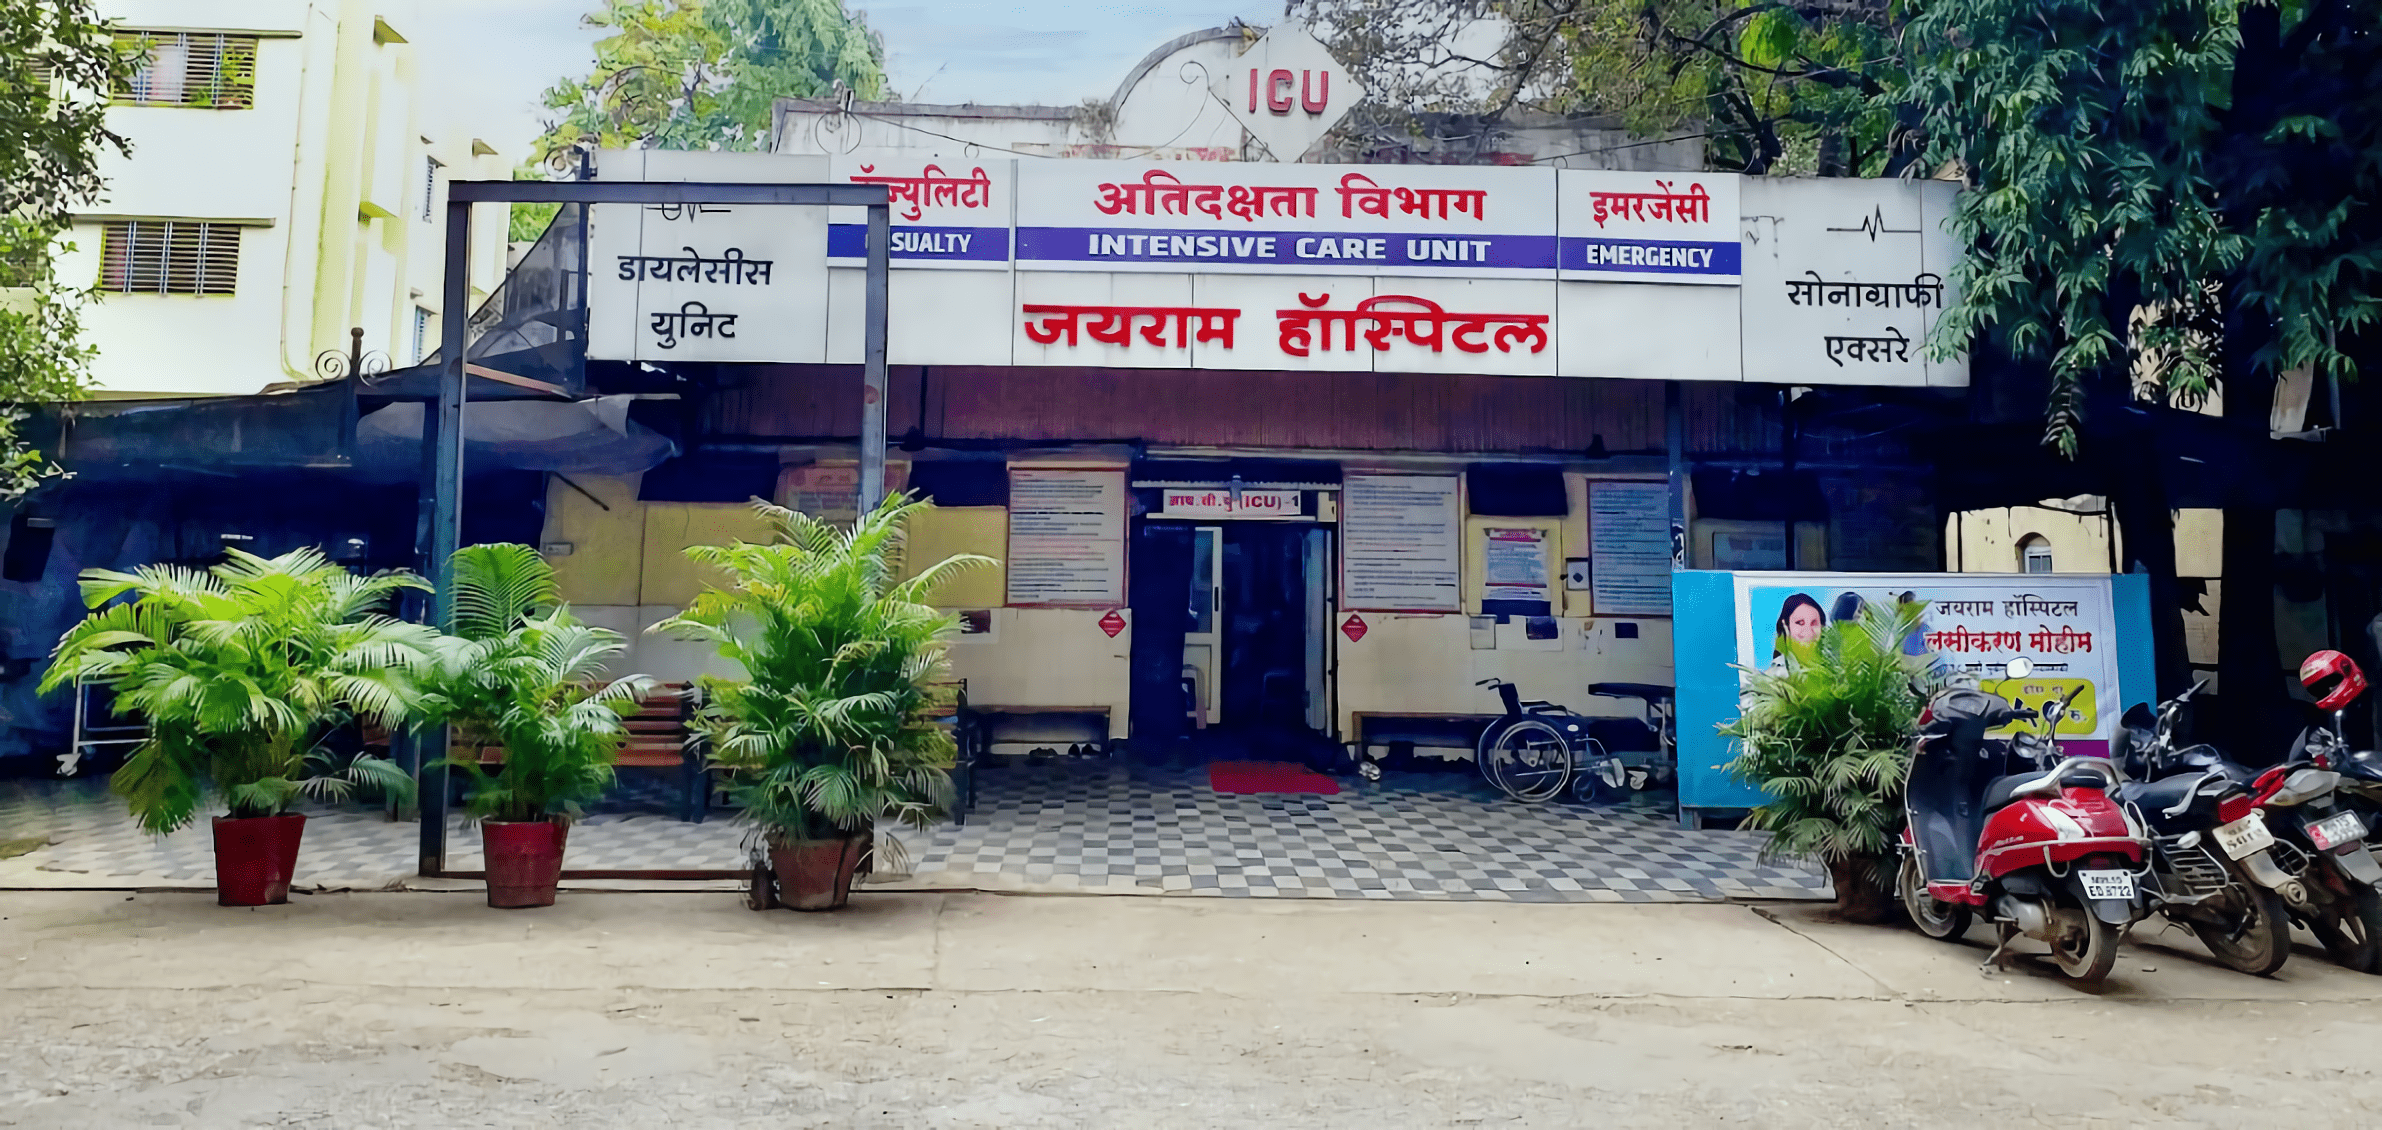 Jairam Hospital And Research Centre